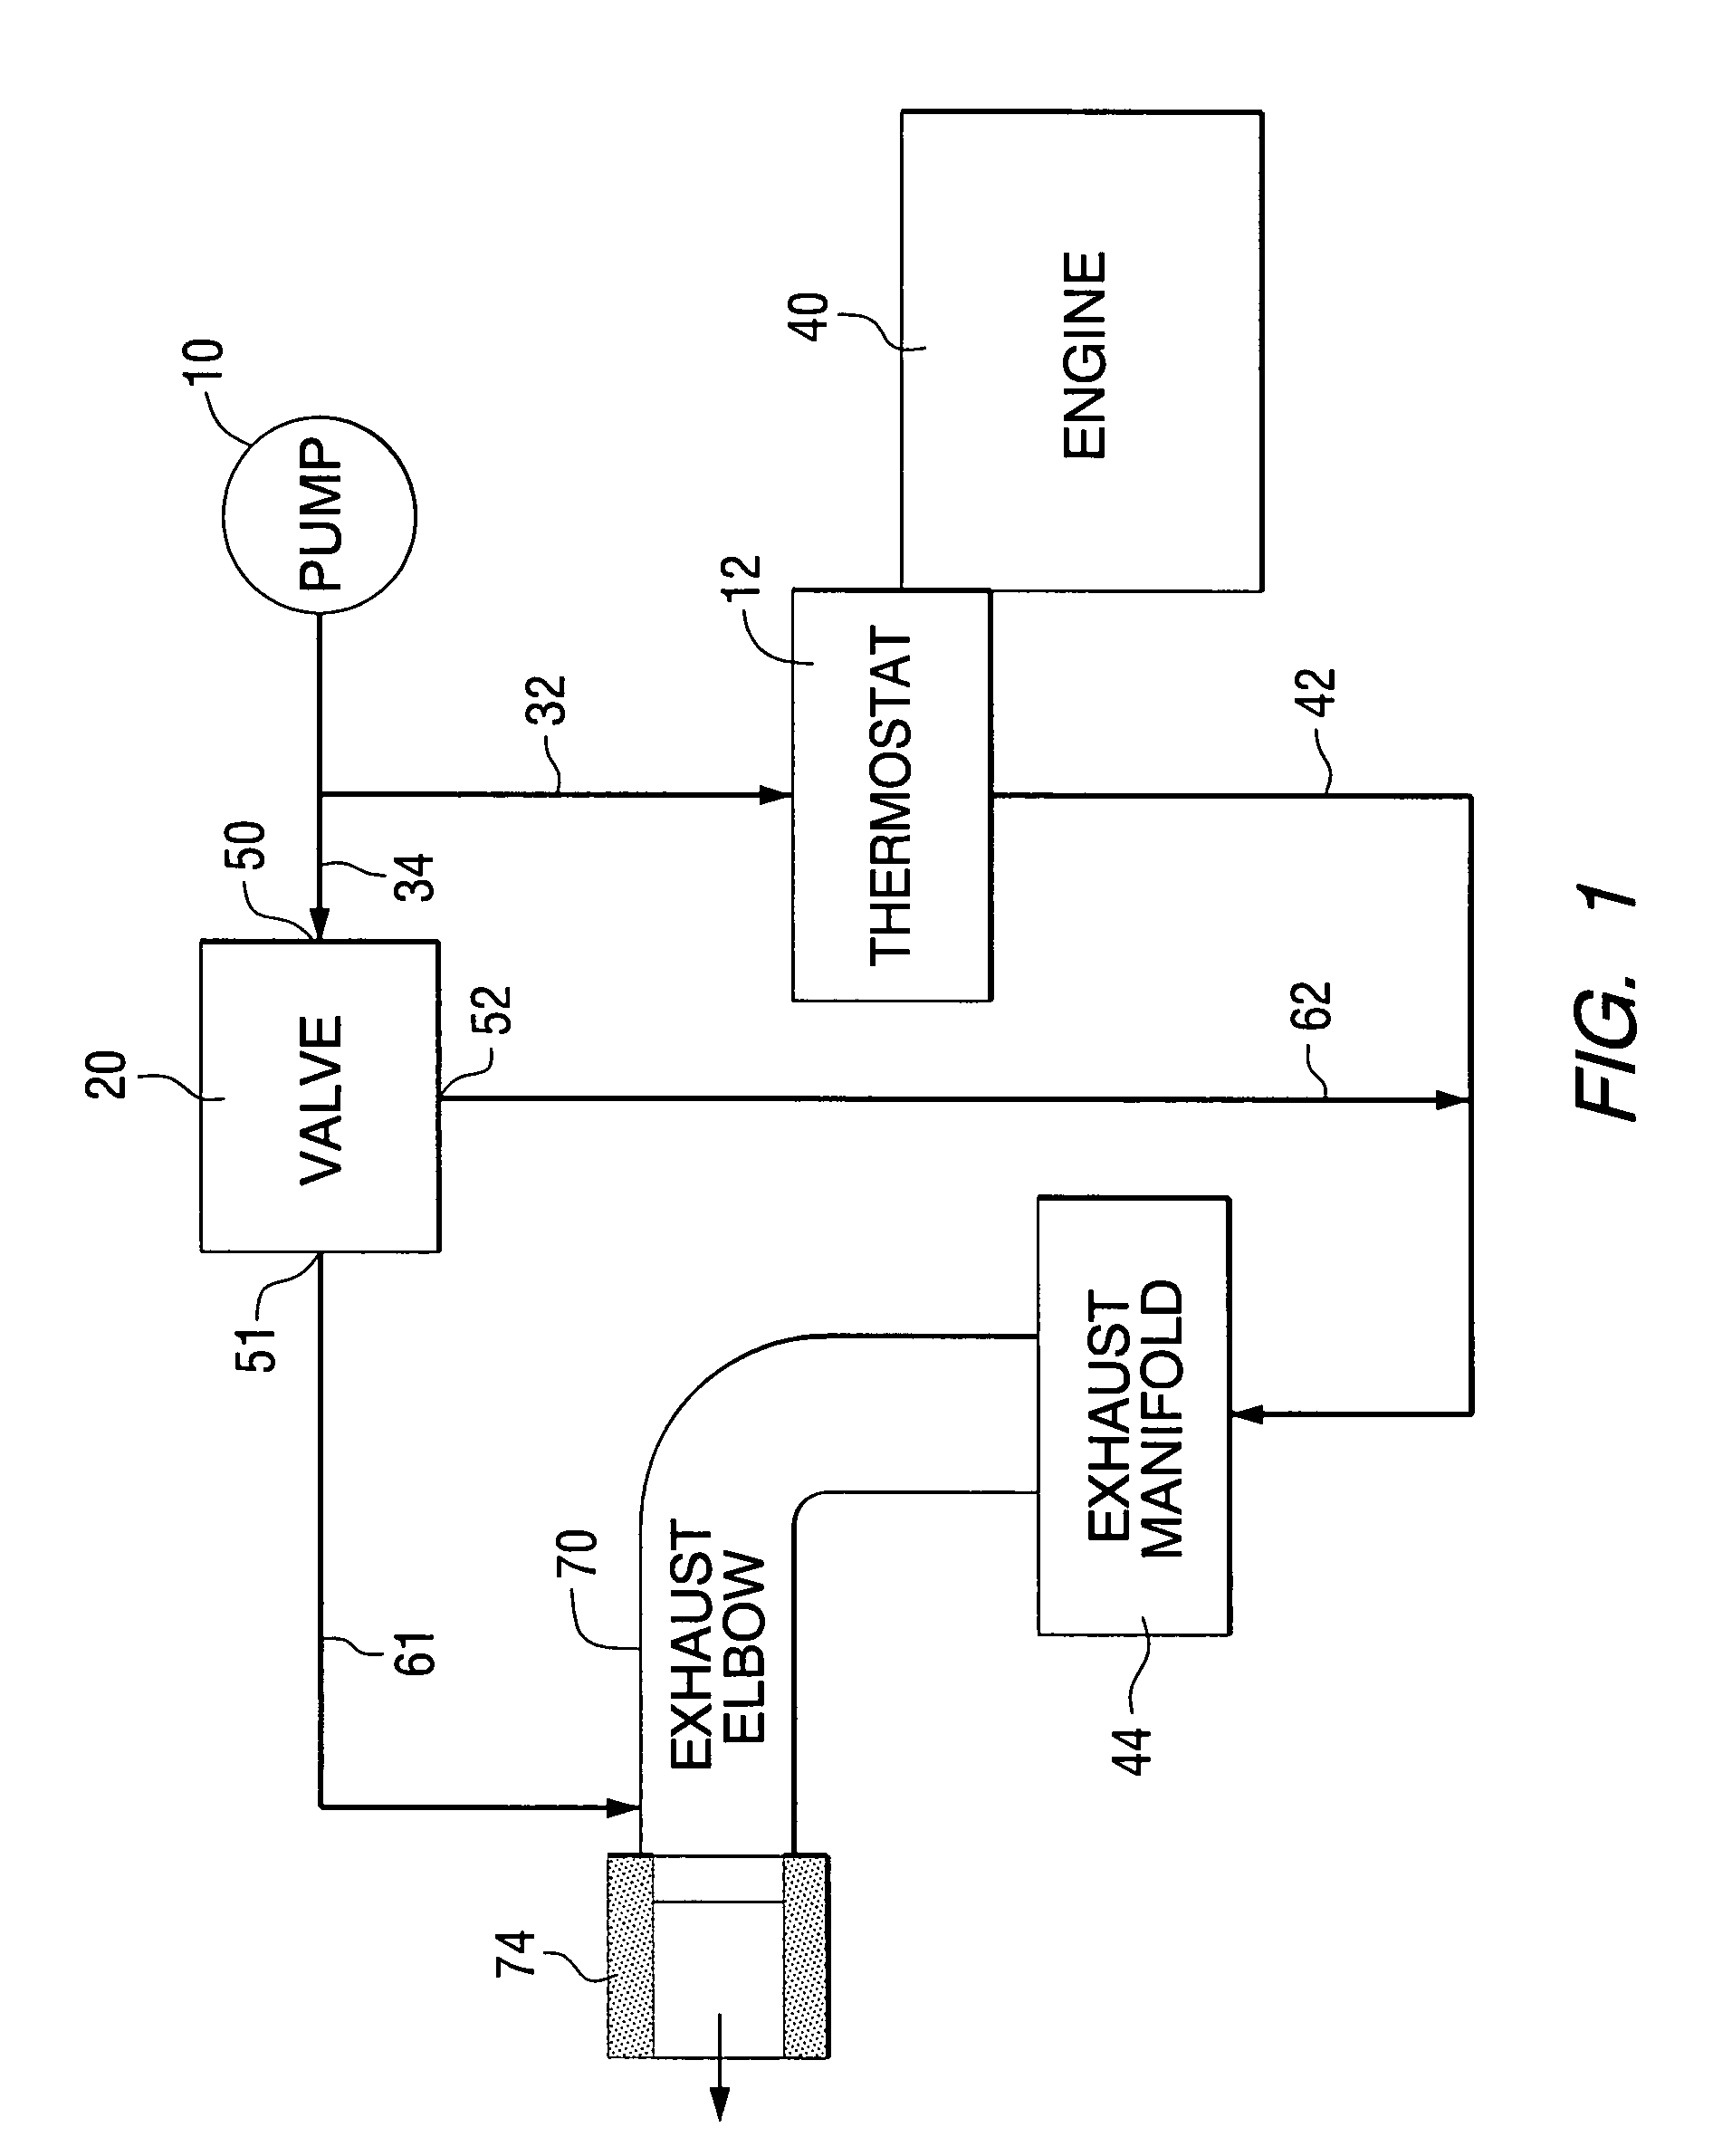 Alternative cooling path system for a marine propulsion device